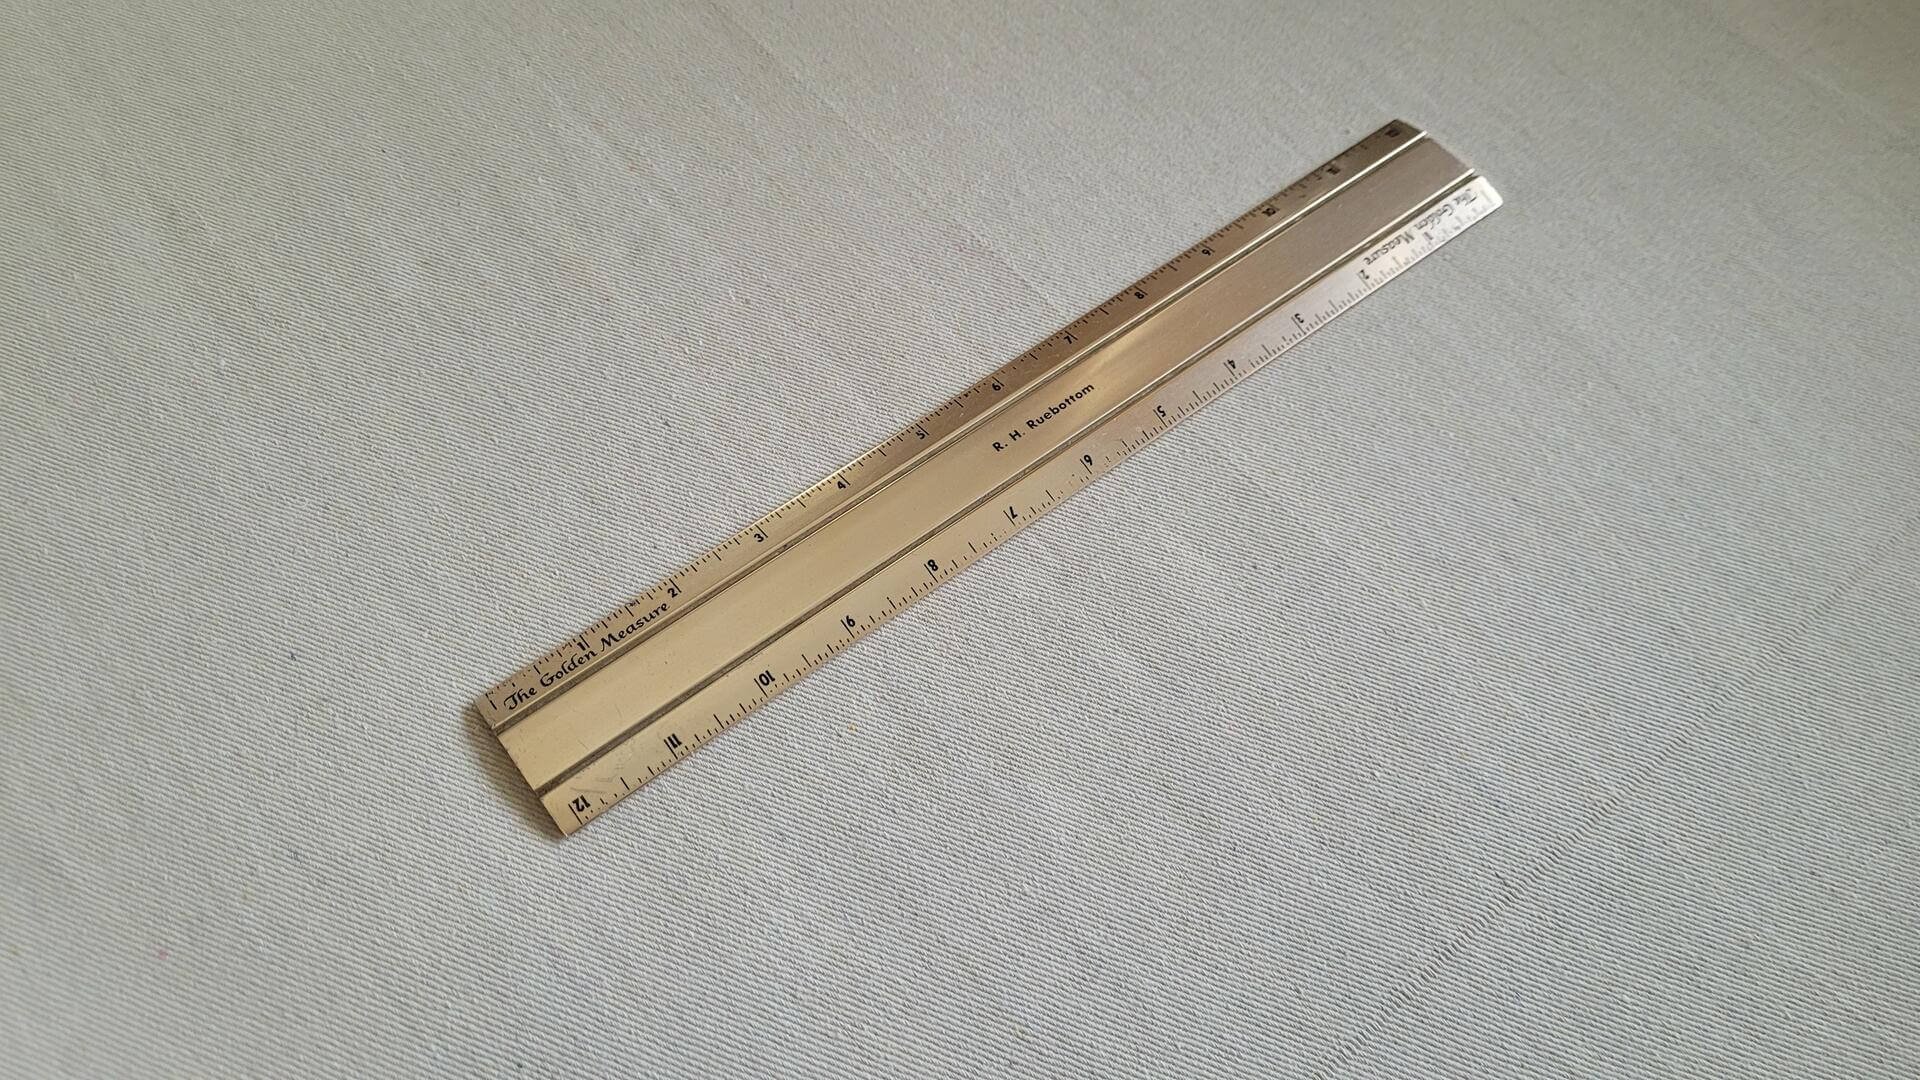 1960s retro 'The Golden Measure' 12 inches advertising ruler made for Belyea Bros. Limited Golden Jubilee 1910-1960. The Company started in 1908 as a plumbing and heating company and they are the holders of the first plumbing and heating license issued in the City of Toronto, PH1